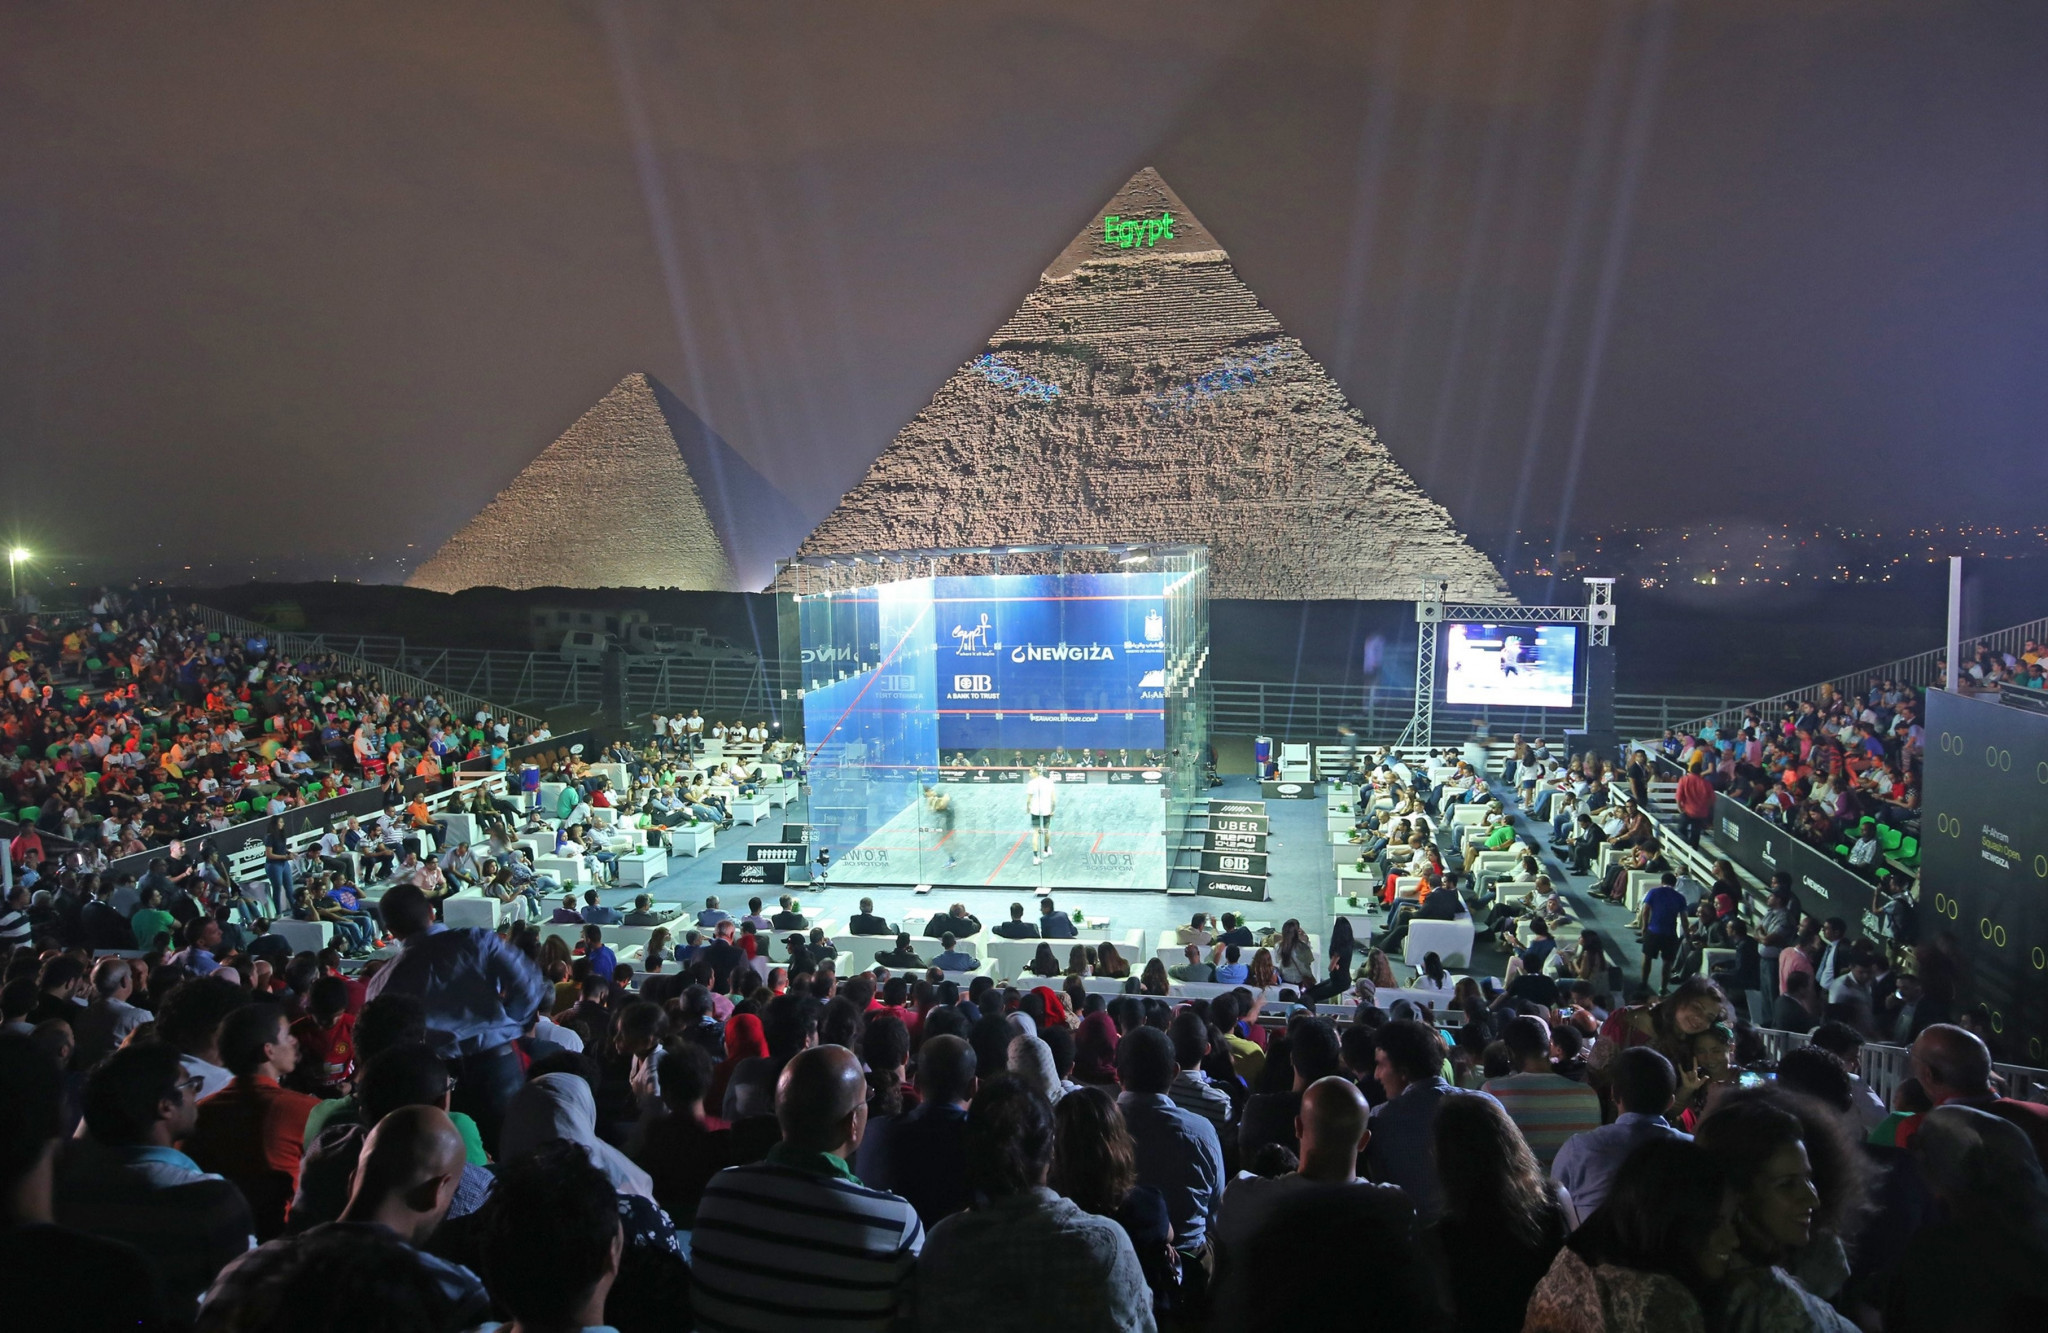 The competitions will take place in front of the Great Pyramid of Giza ©PSA